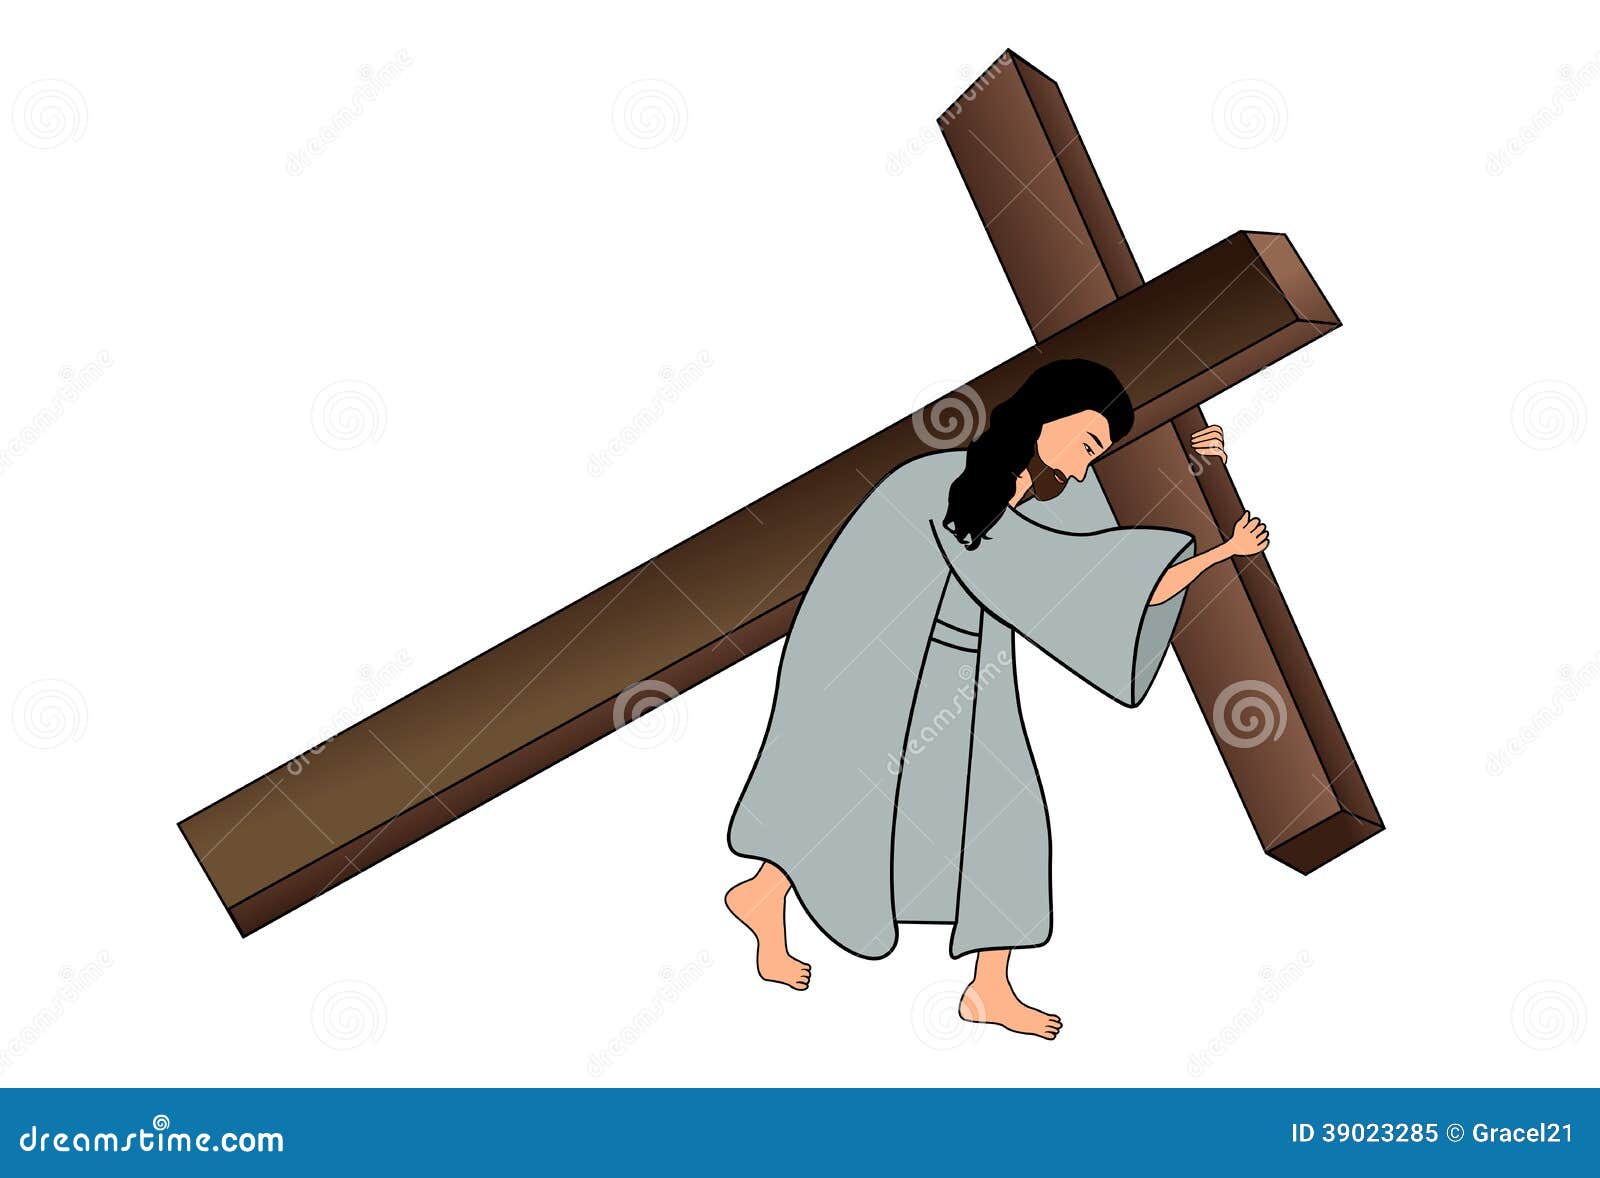 free clipart jesus carrying cross - photo #29